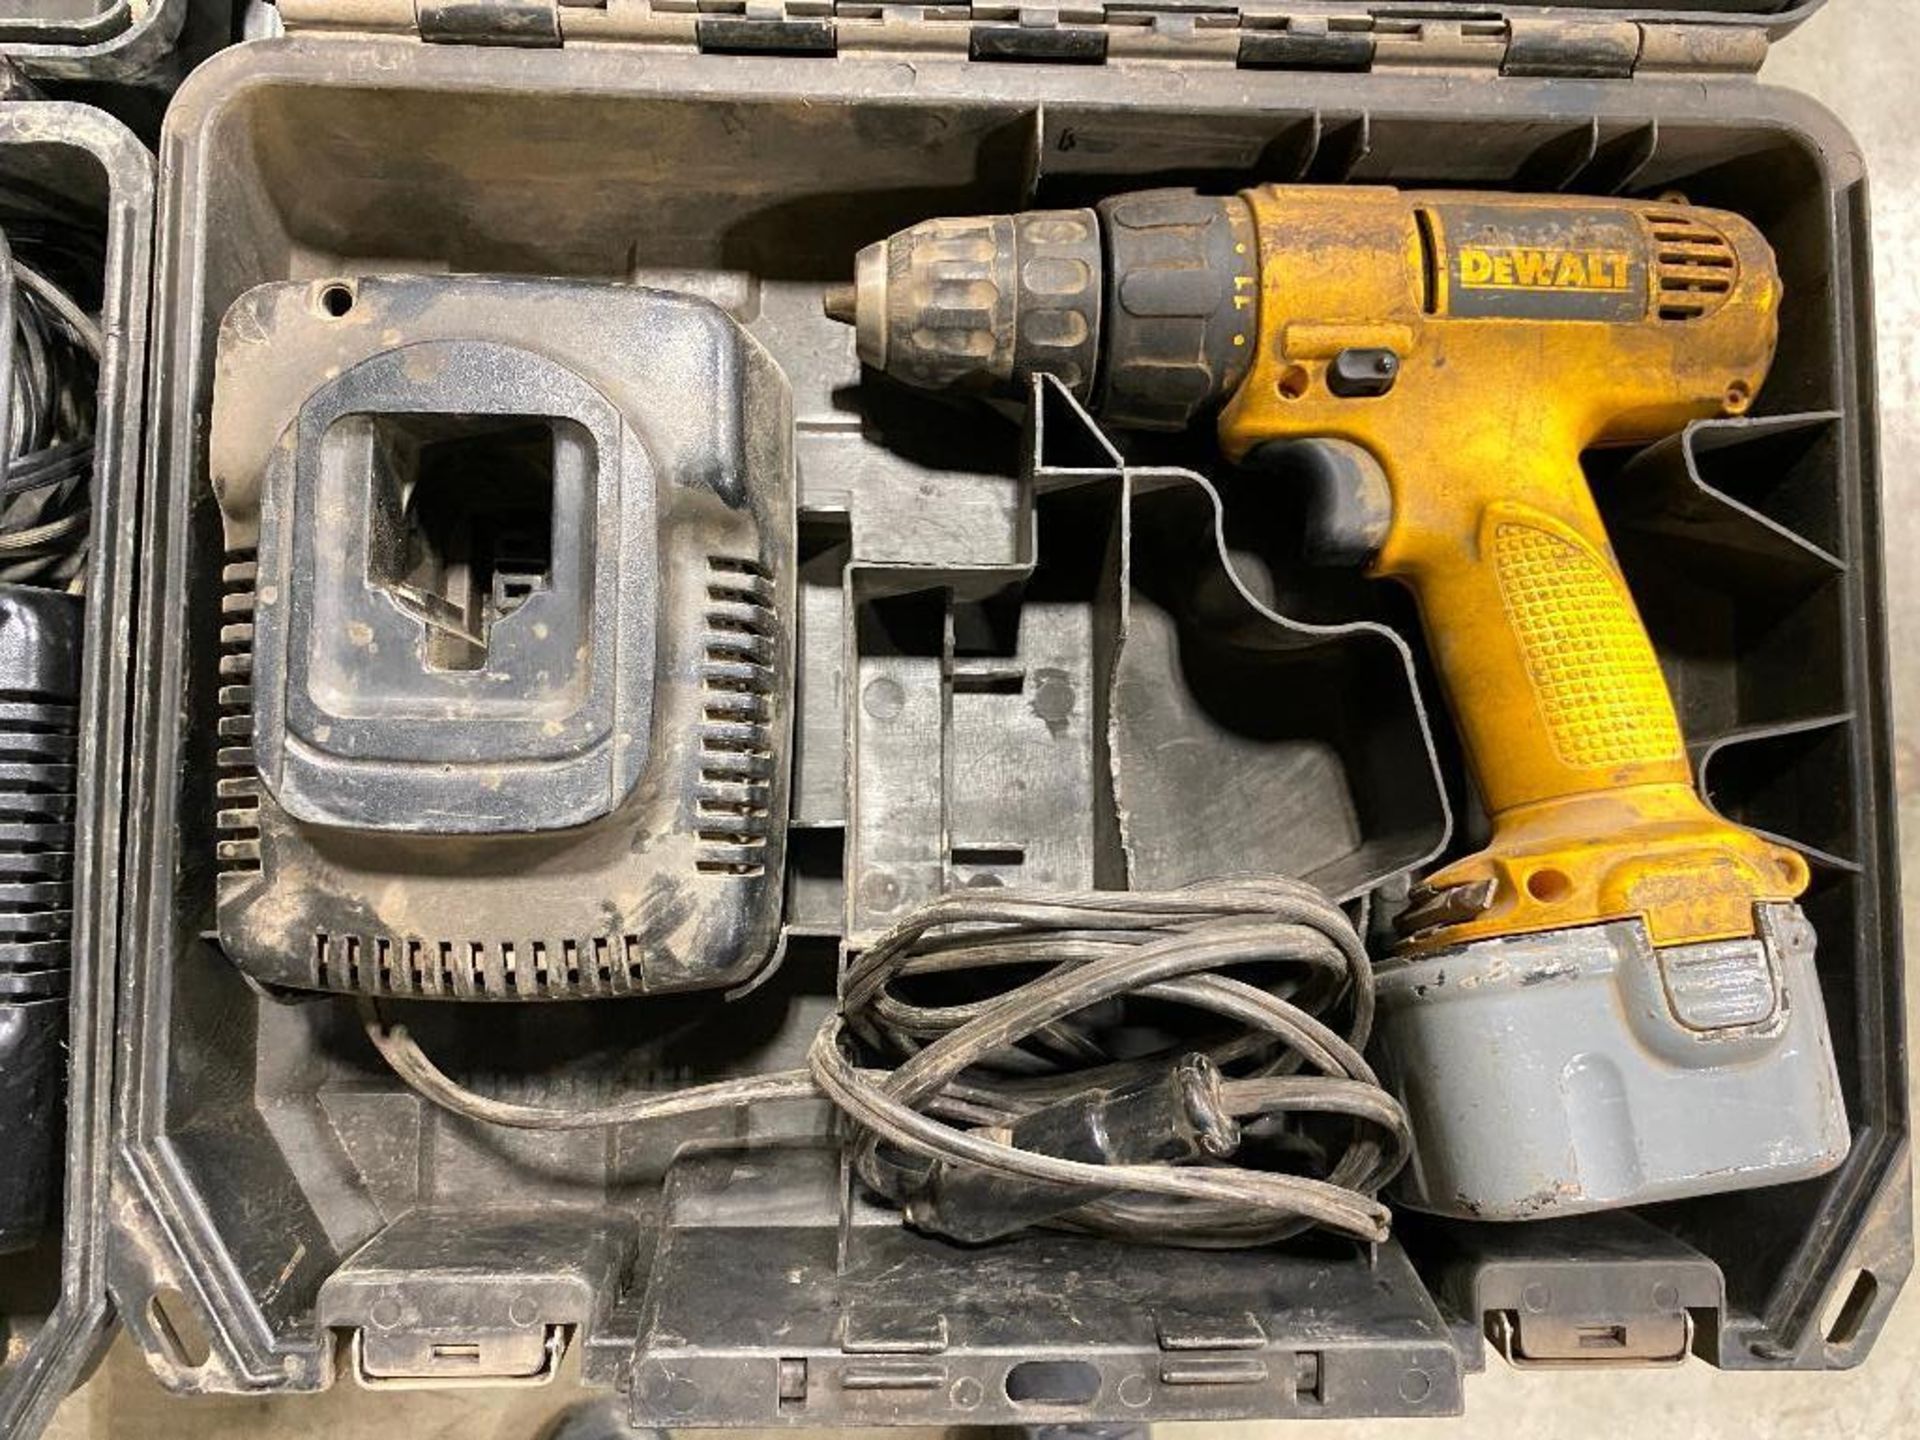 DeWalt Cordless Drill w/ Charger - Image 2 of 6